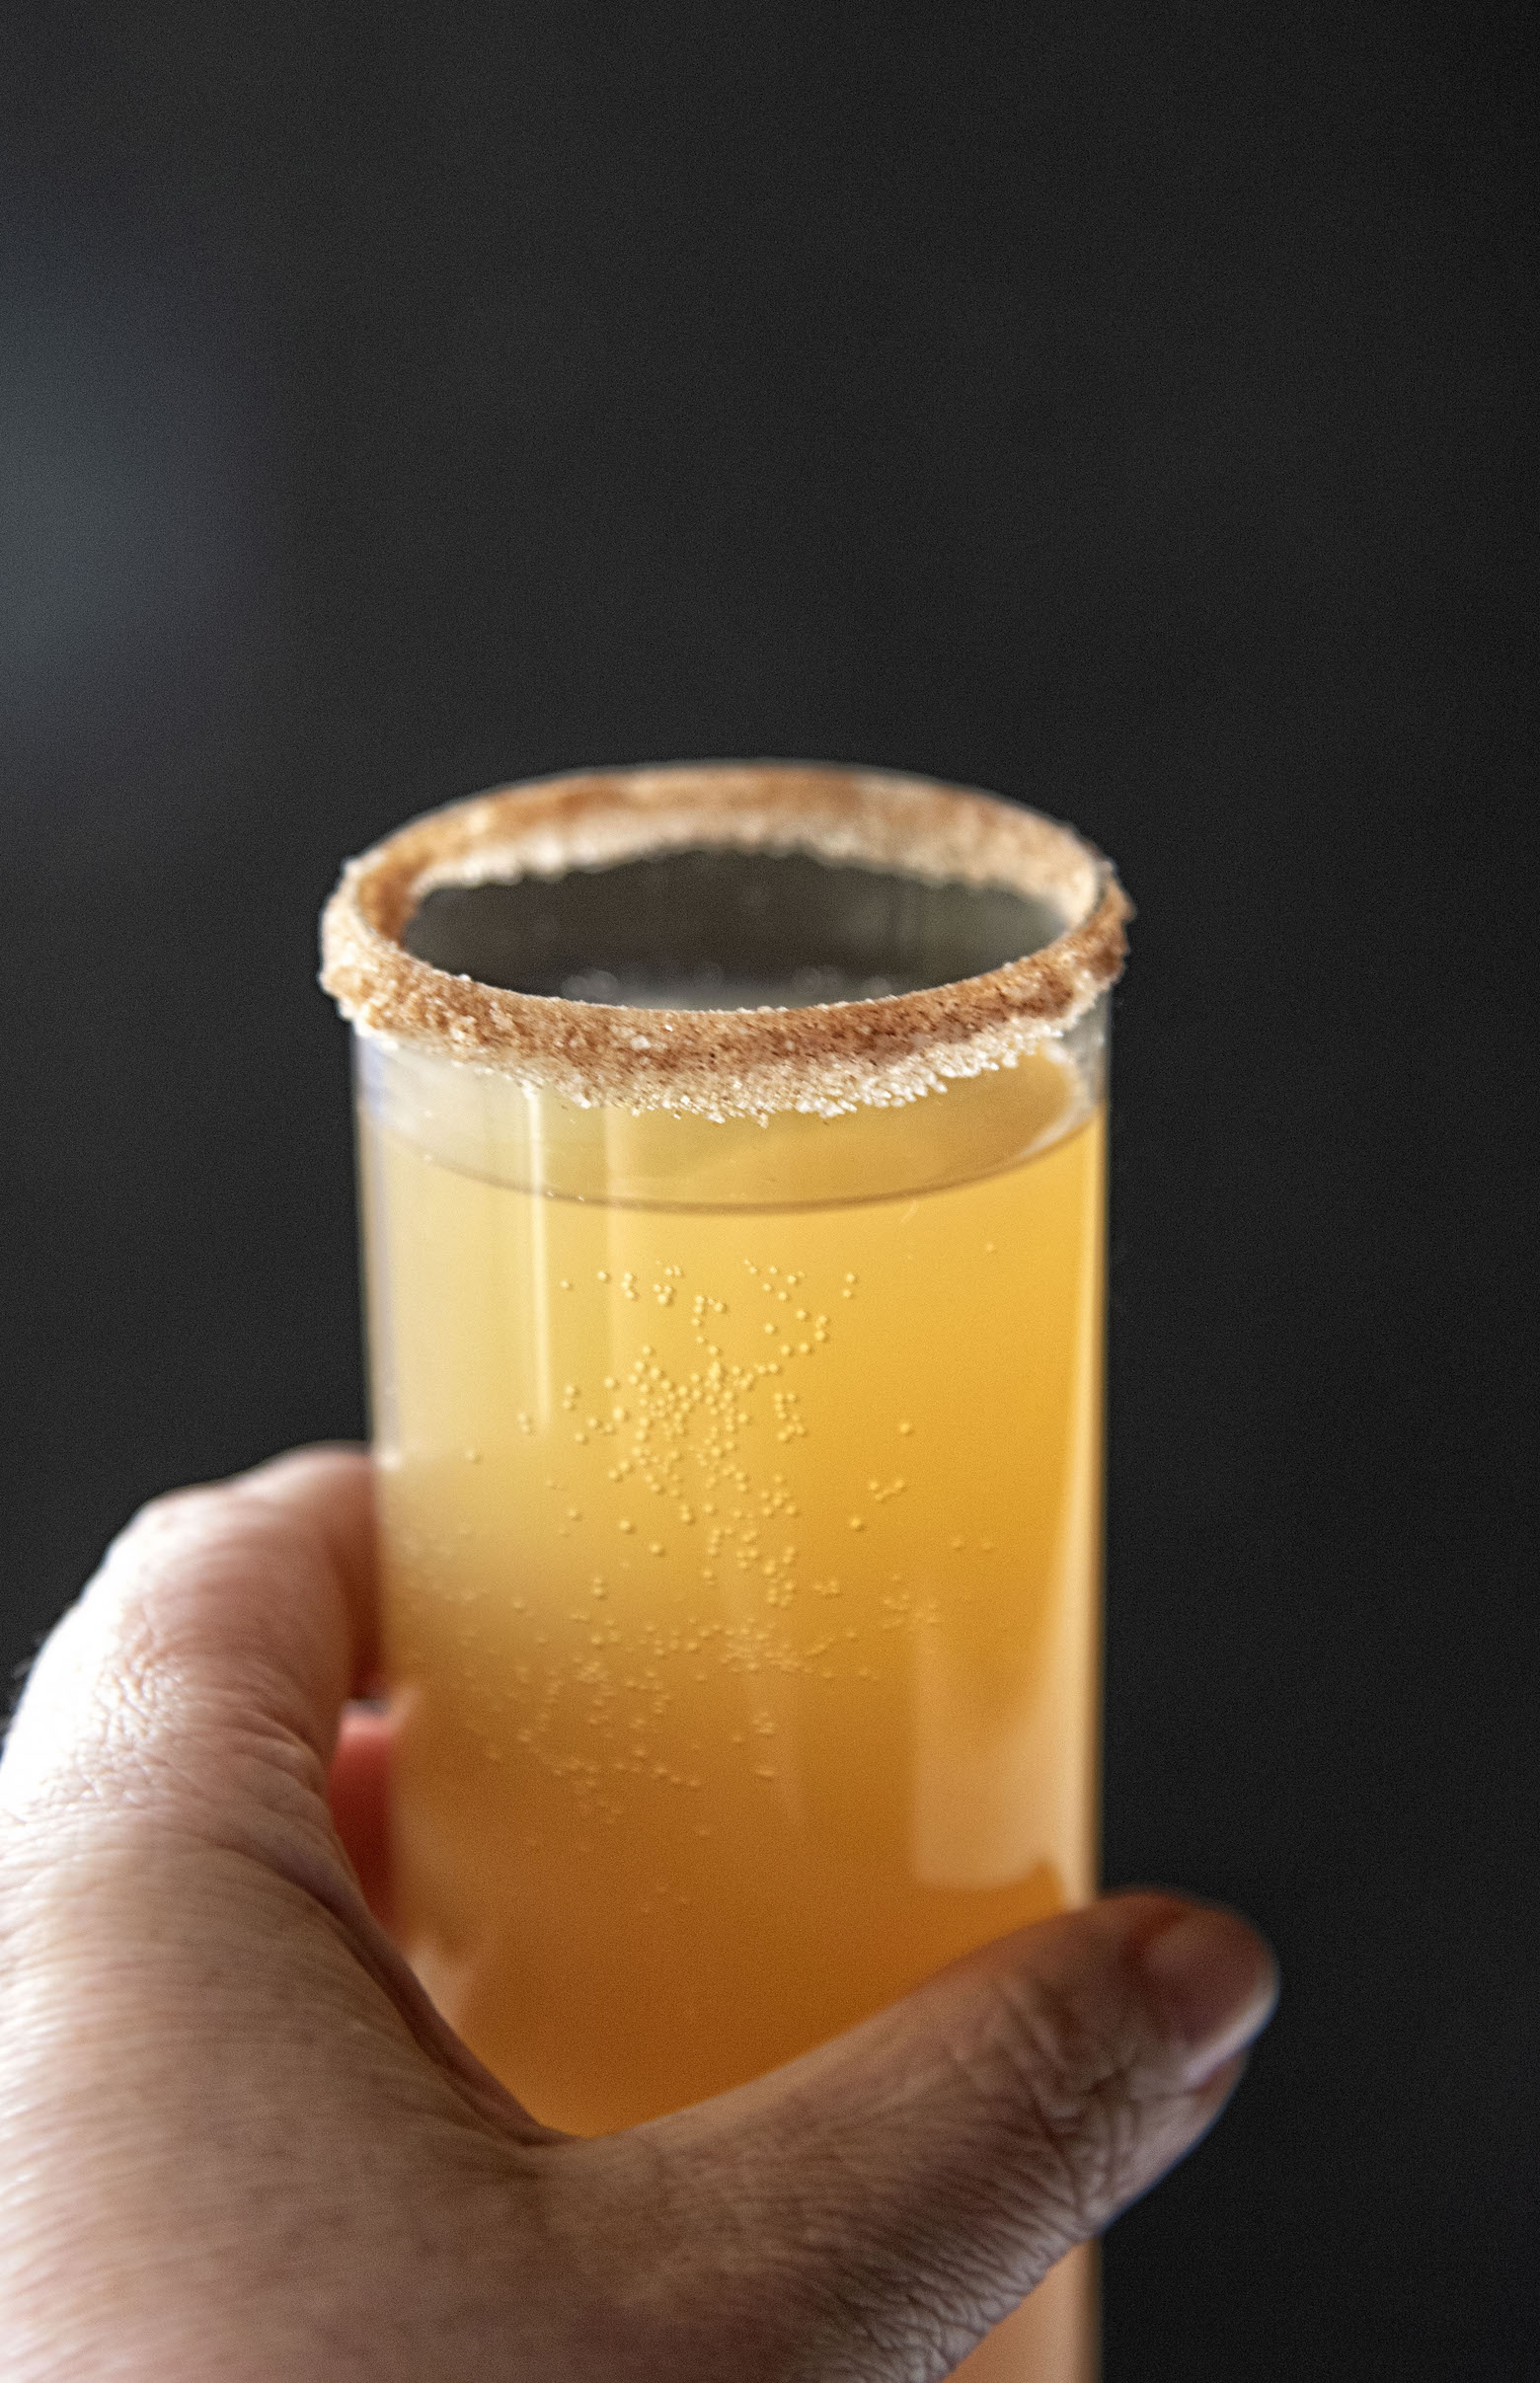 Snickerdoodle Apple Cider Mimosa